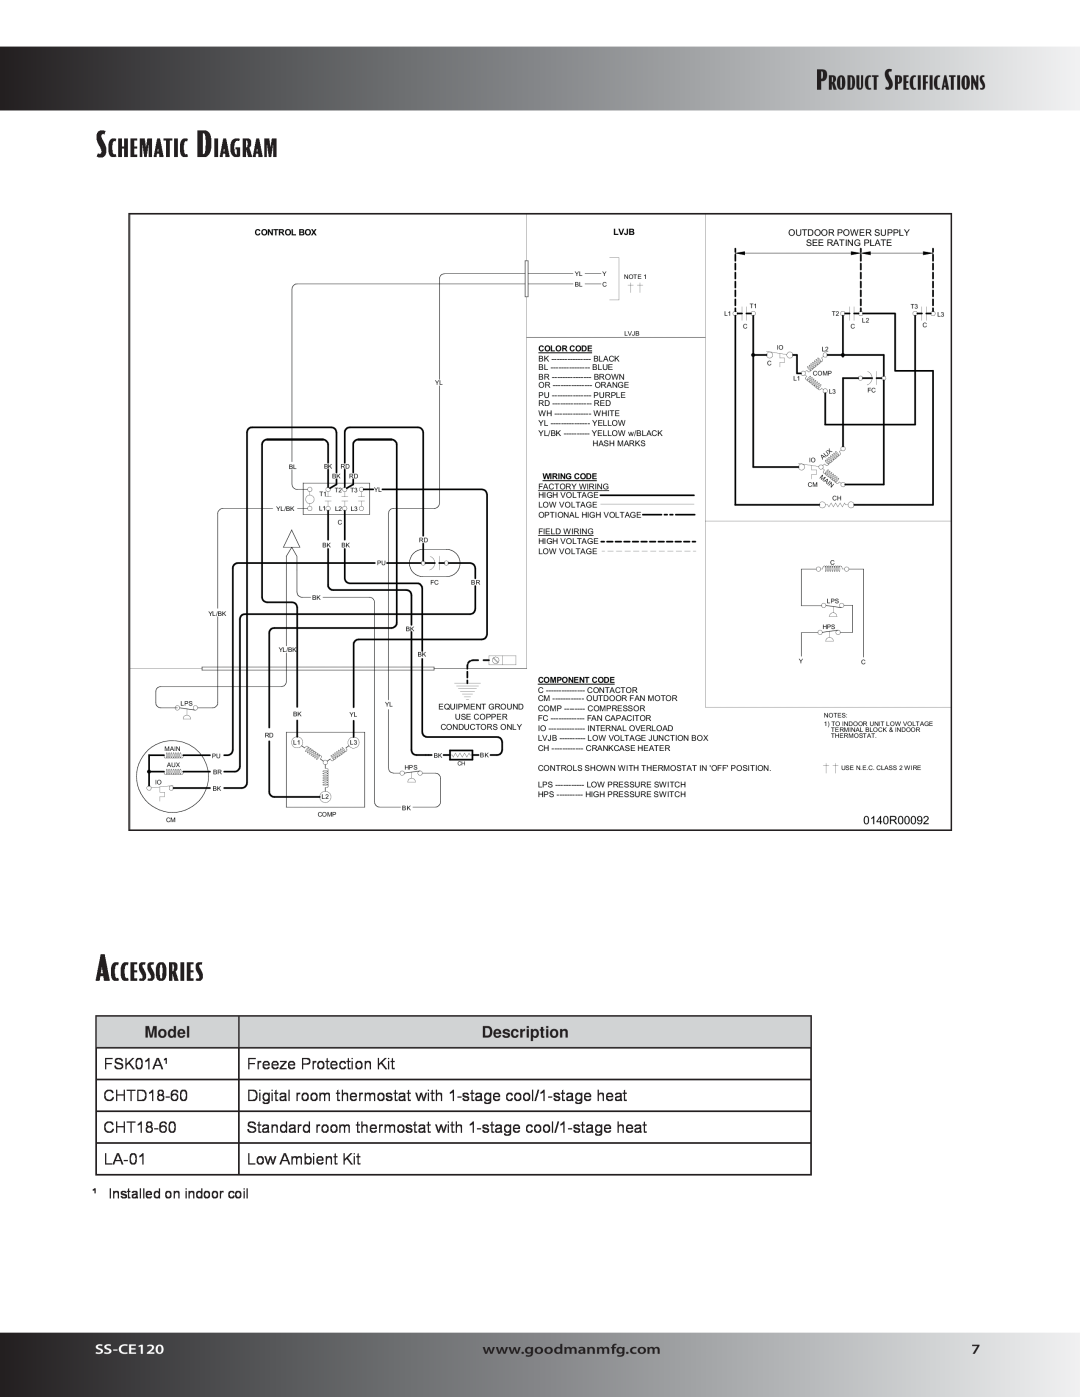 Goodman Mfg CE COMMERCIAL SPLIT SYSTEM AIR CONDITIONER Schematic Diagram, Accessories, Product Specifications, SS-CE120 